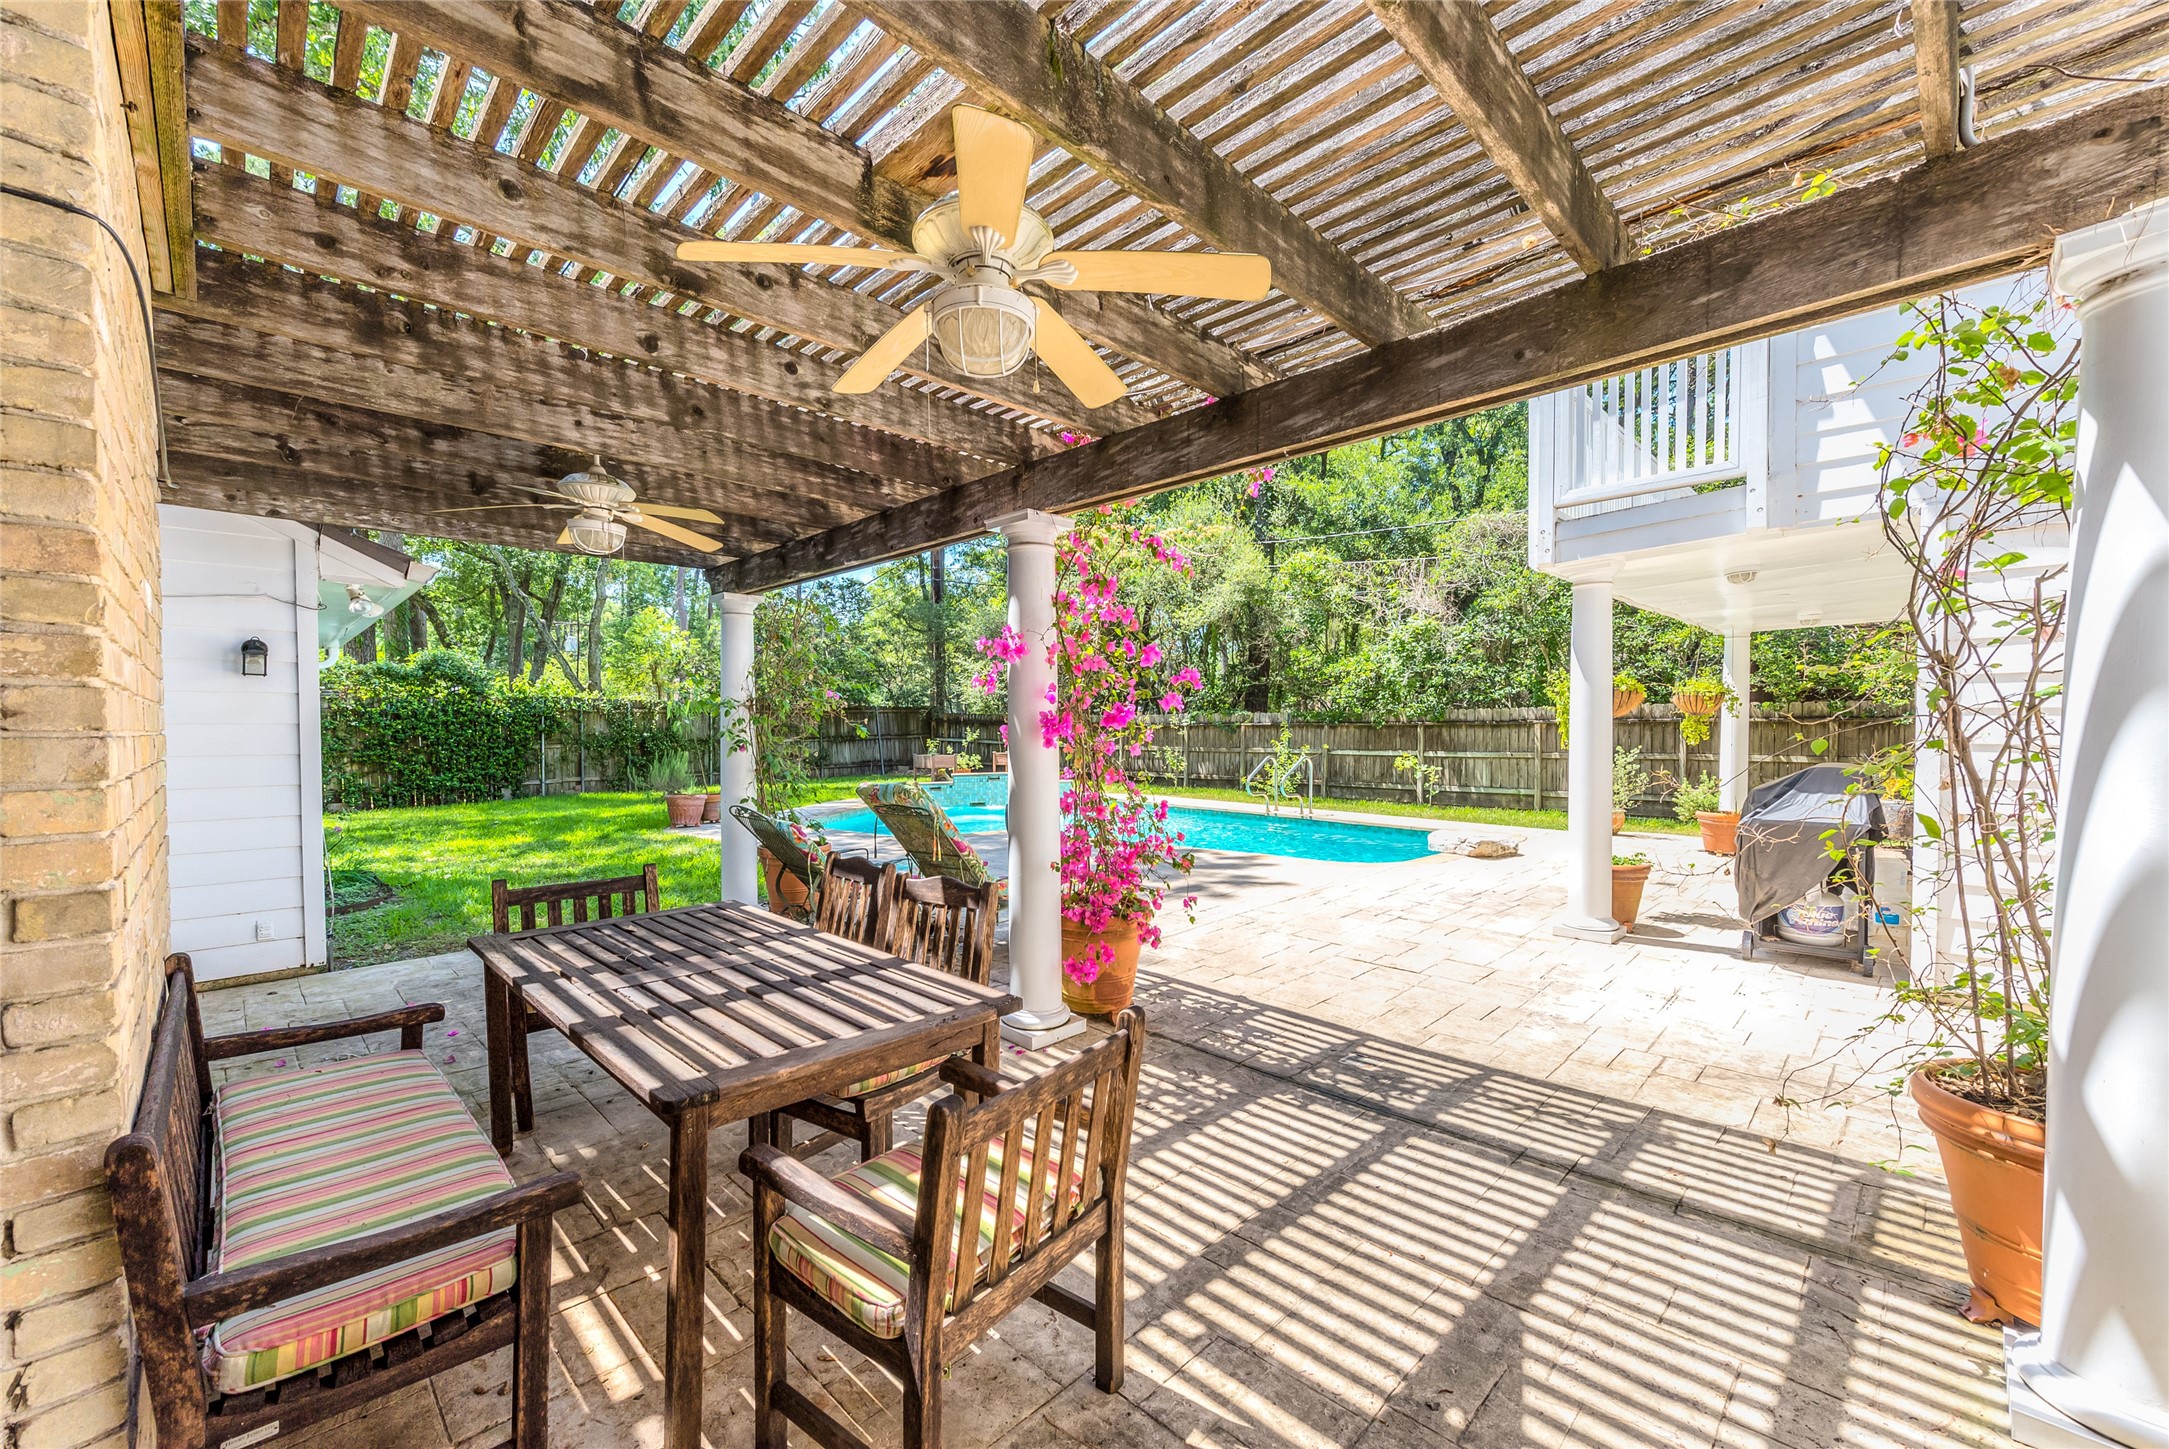 Beautifully maintained patio/deck next to pool - perfect for Houston summer.